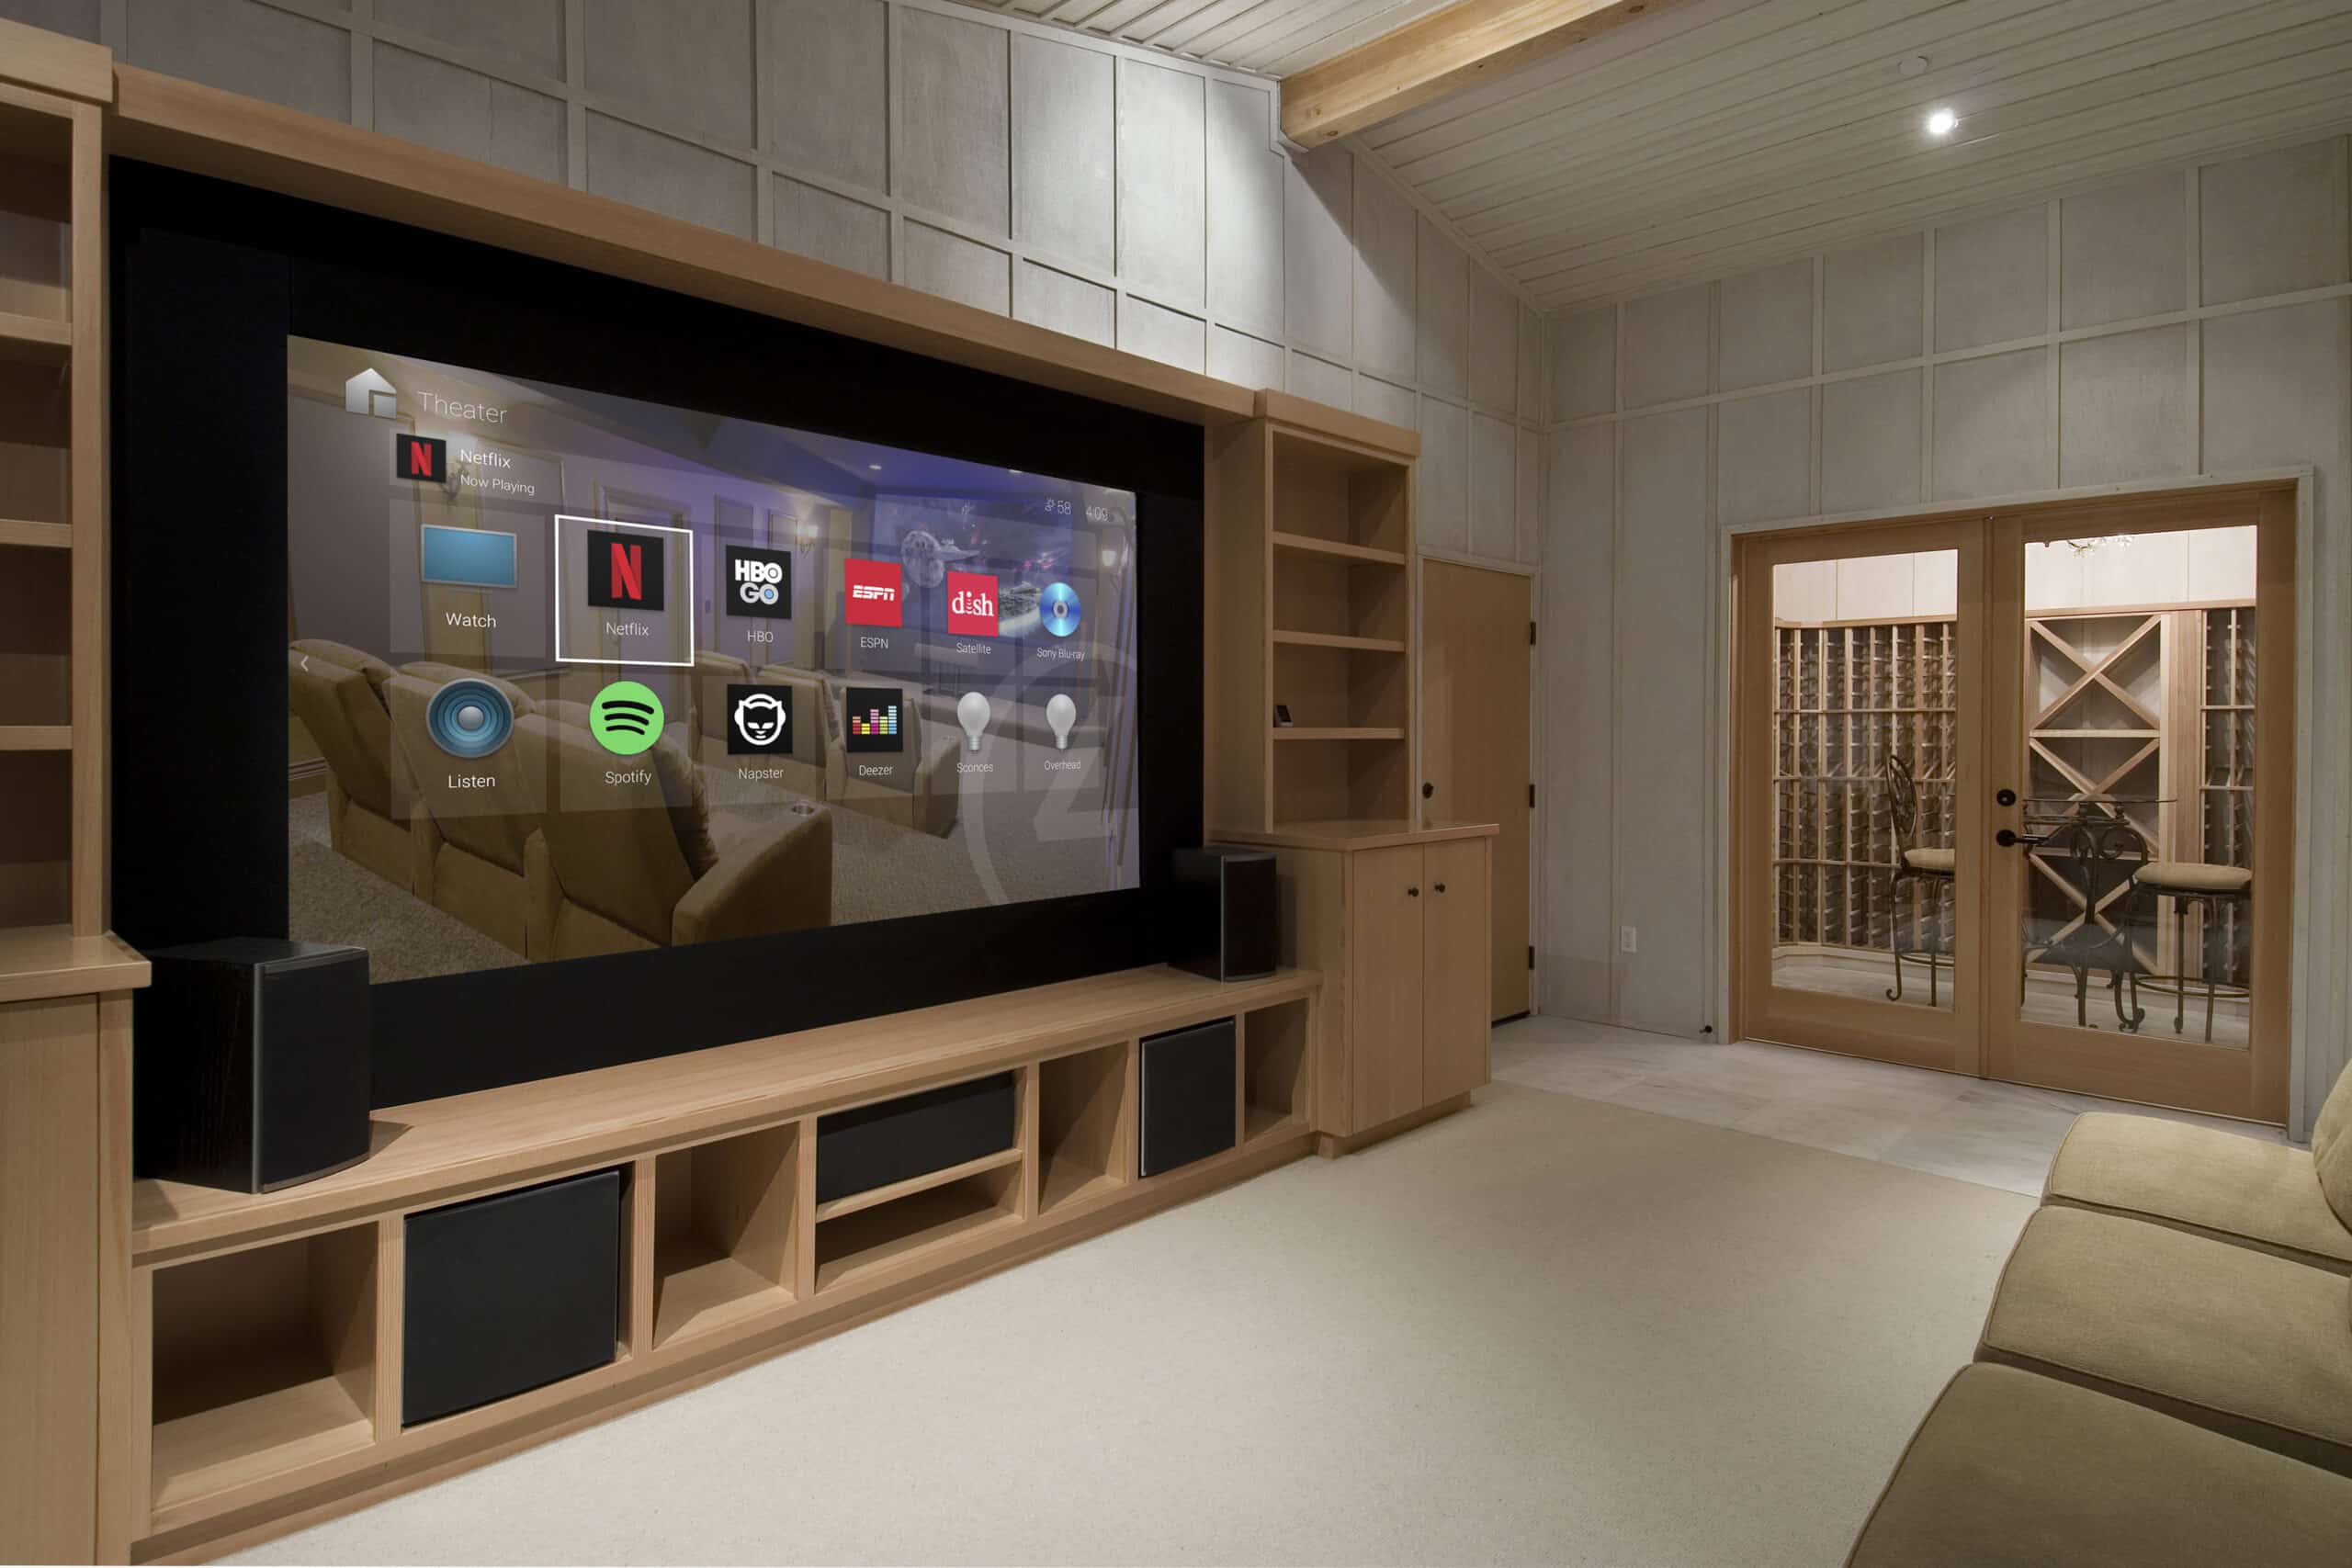 Control4 Home Automation lets you create a personalised smart home experience.